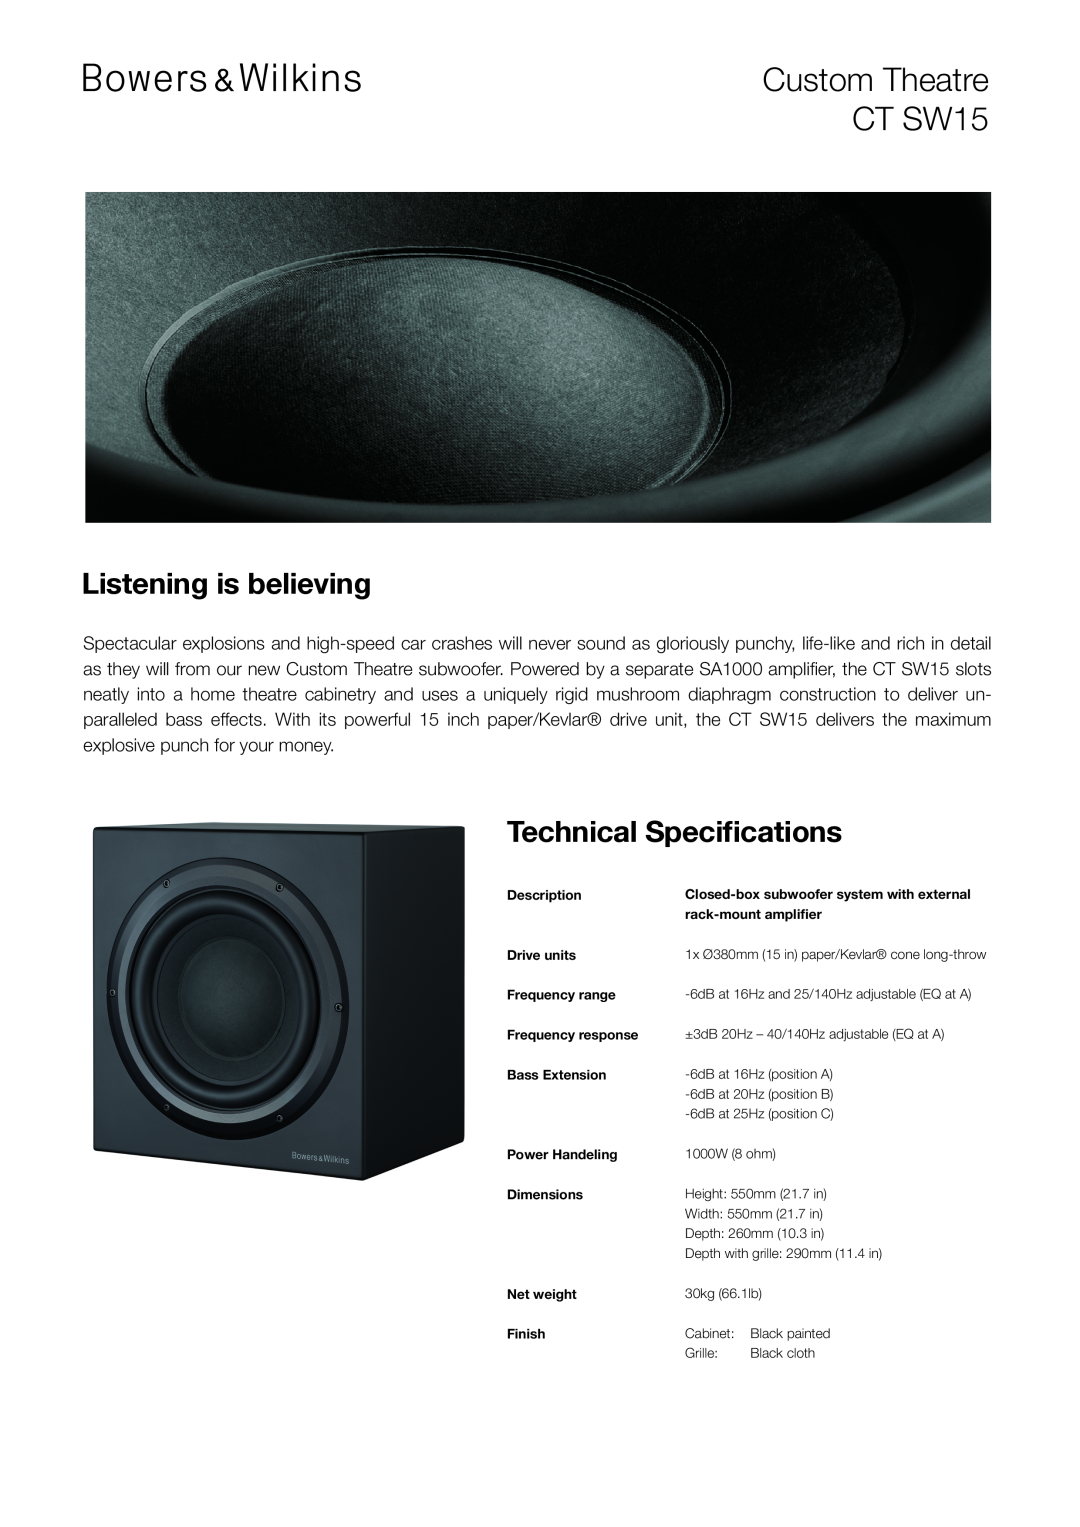 Bowers & Wilkins CT SW10 dimensions Custom Theatre CT SW15, Listening is believing, Technical Specifications 